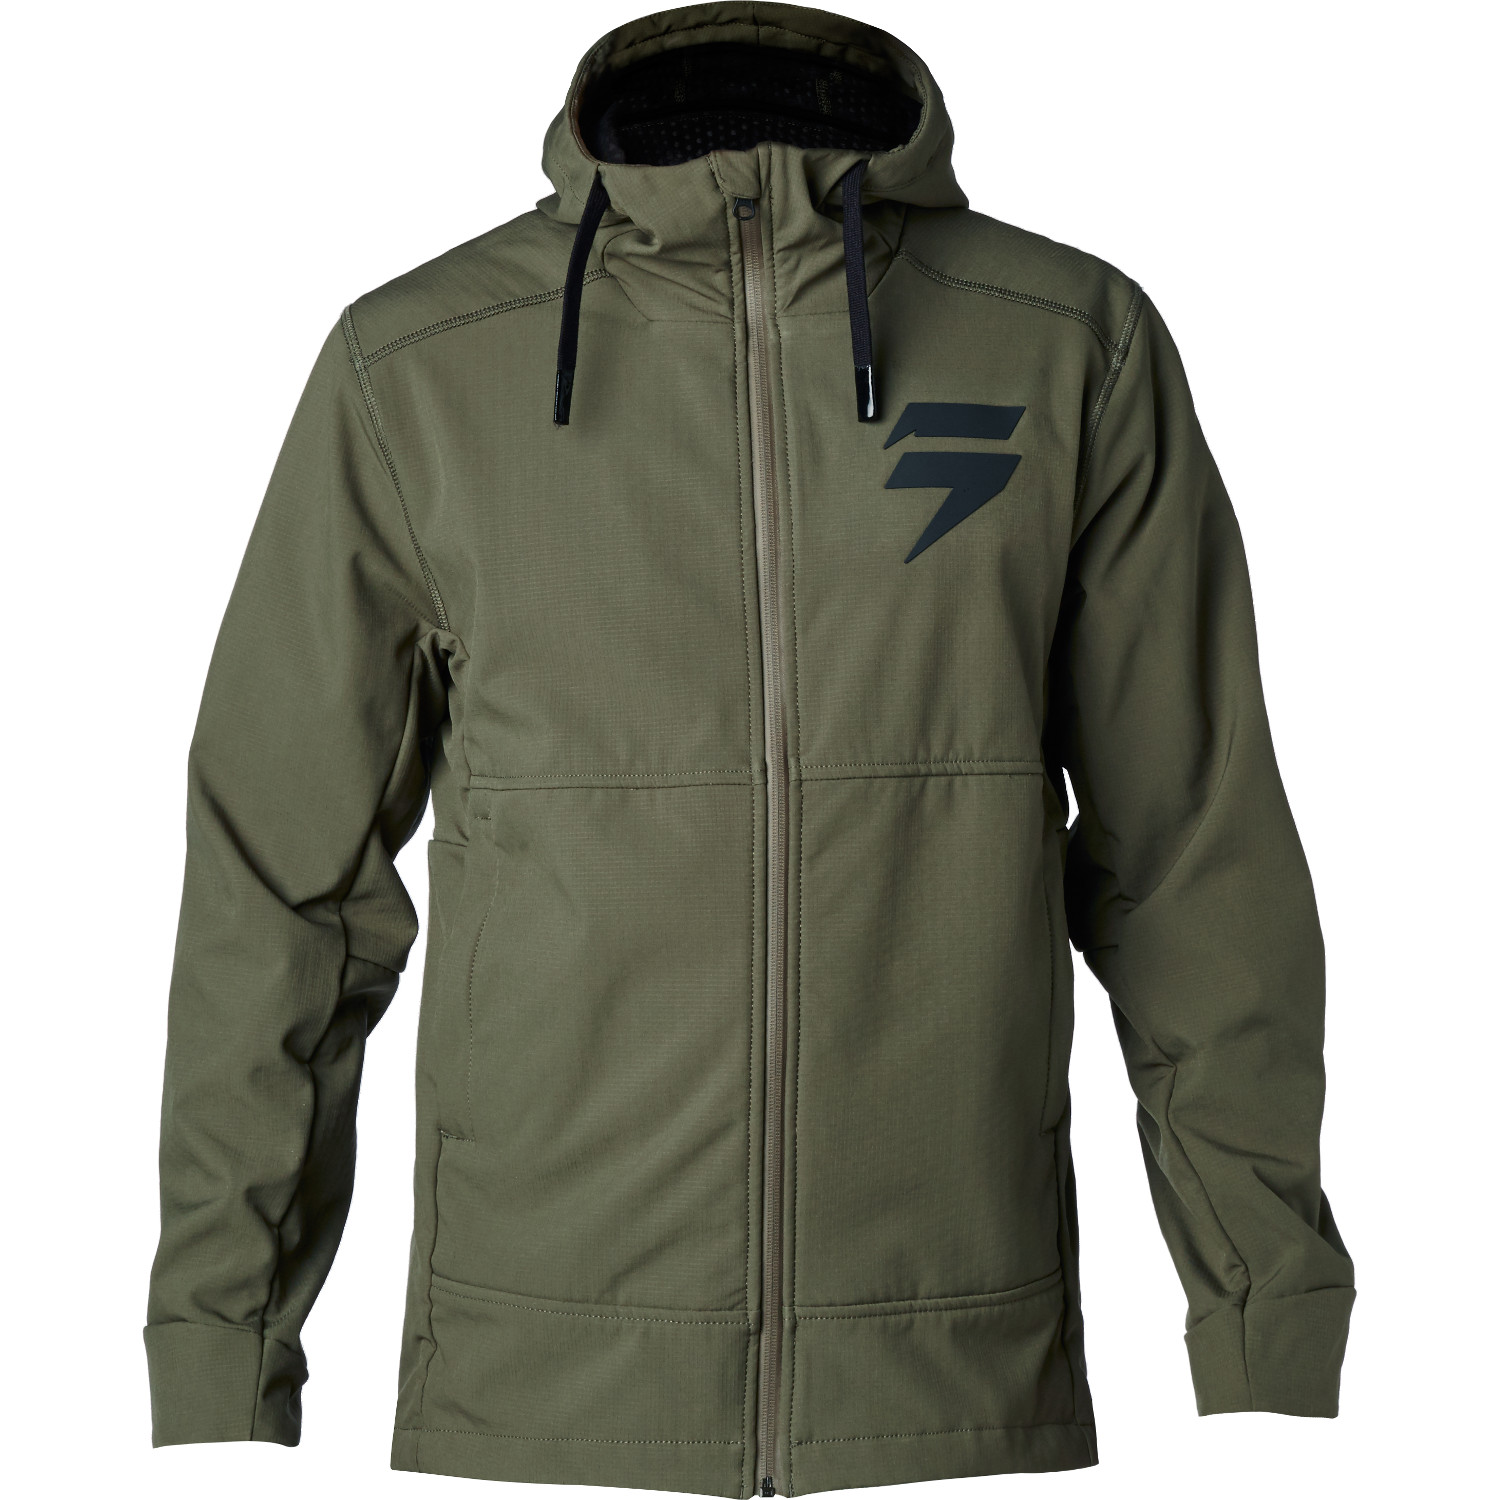 Shift Jacket Recon Pit Fat Green